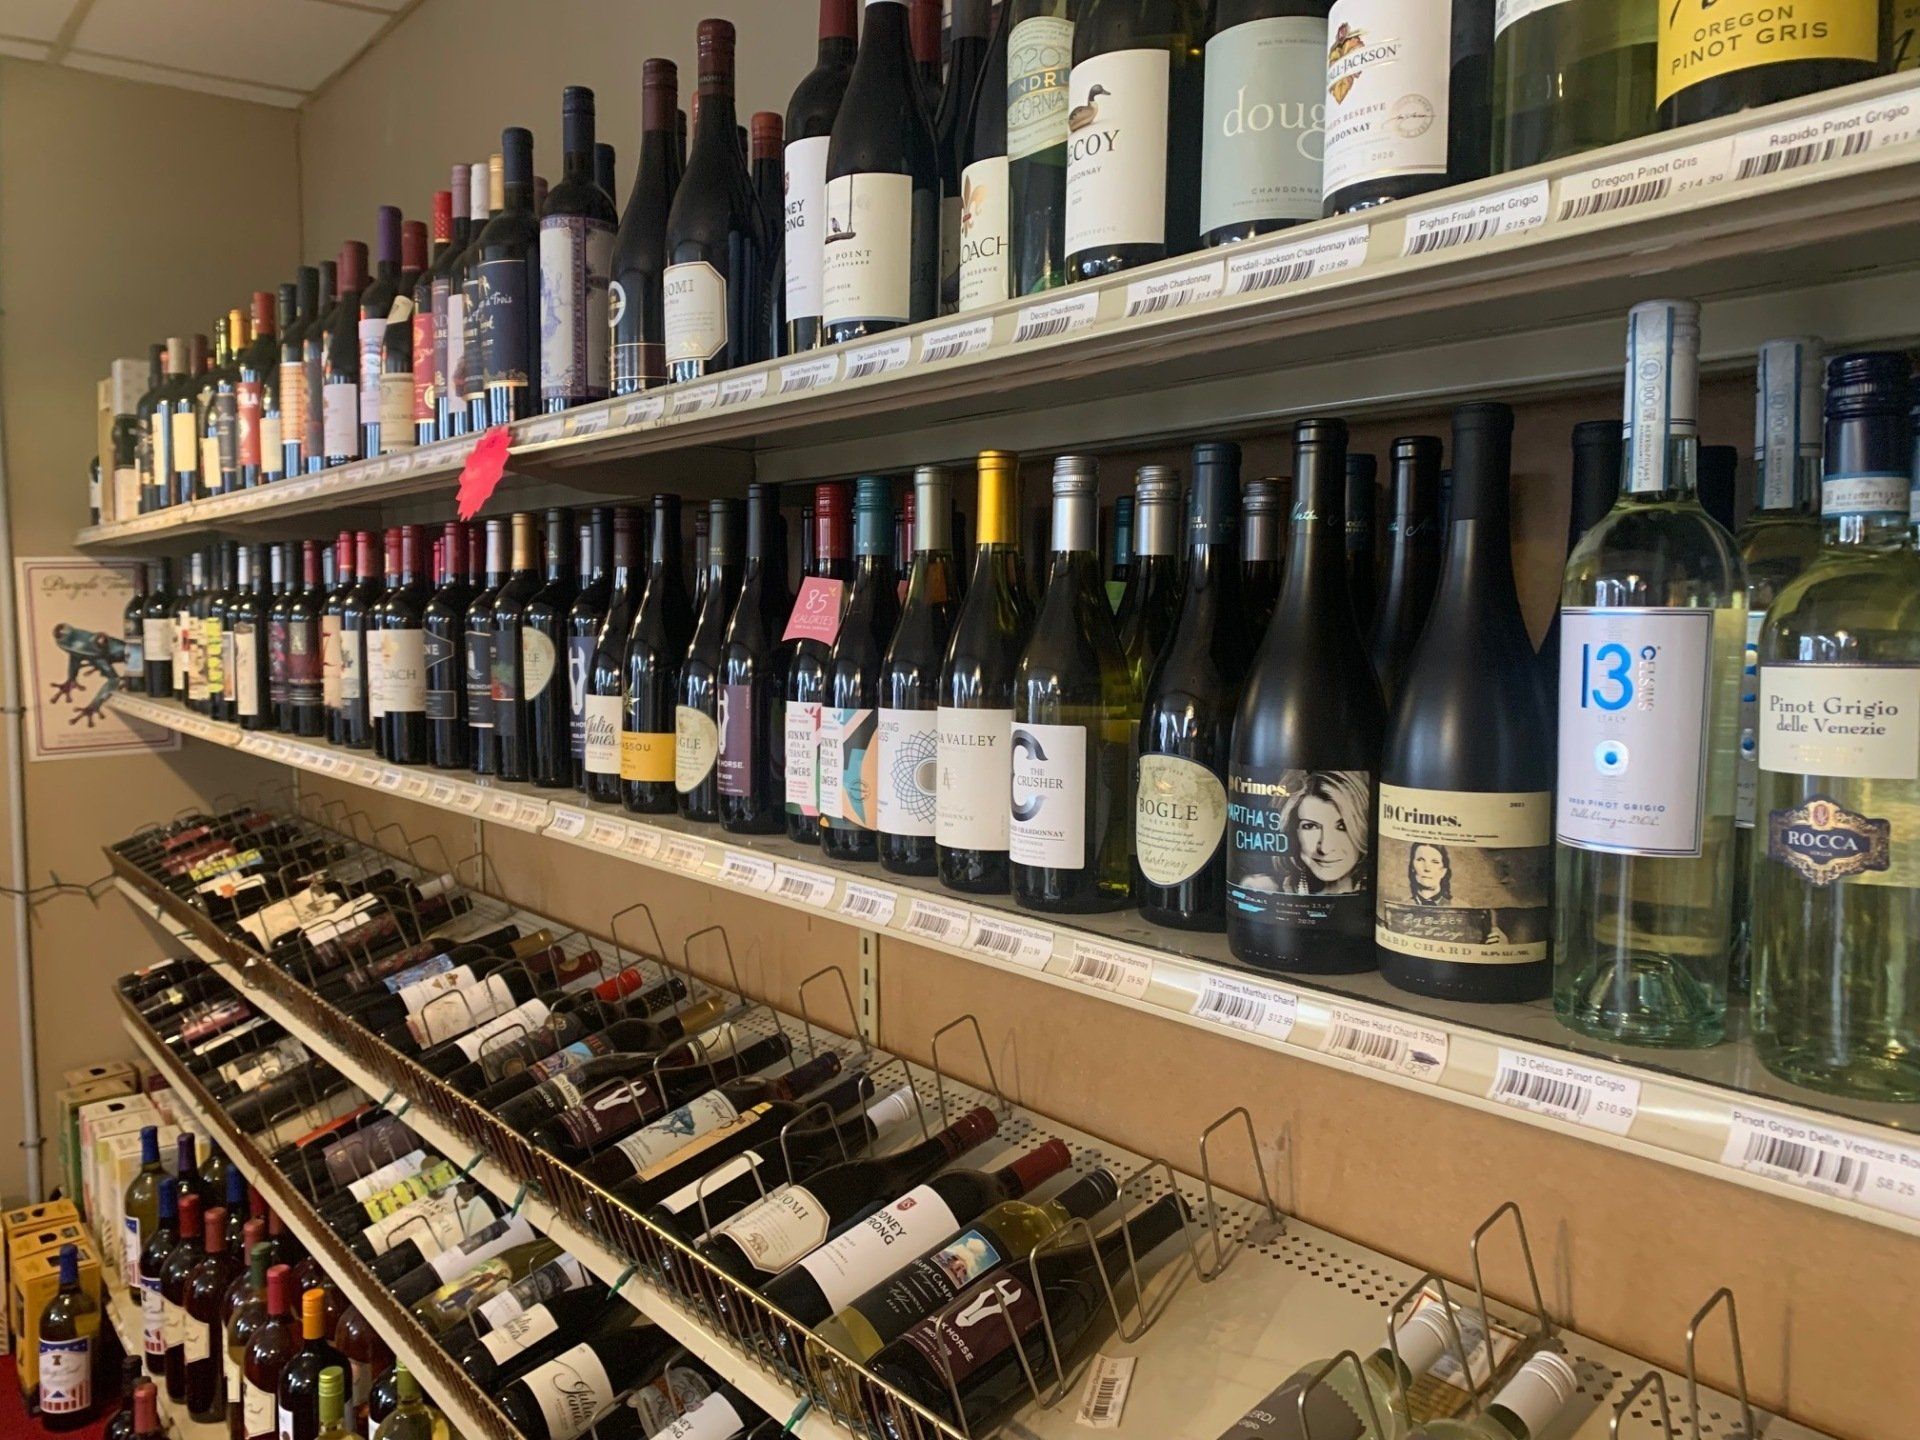 A shelf filled with lots of bottles of wine.